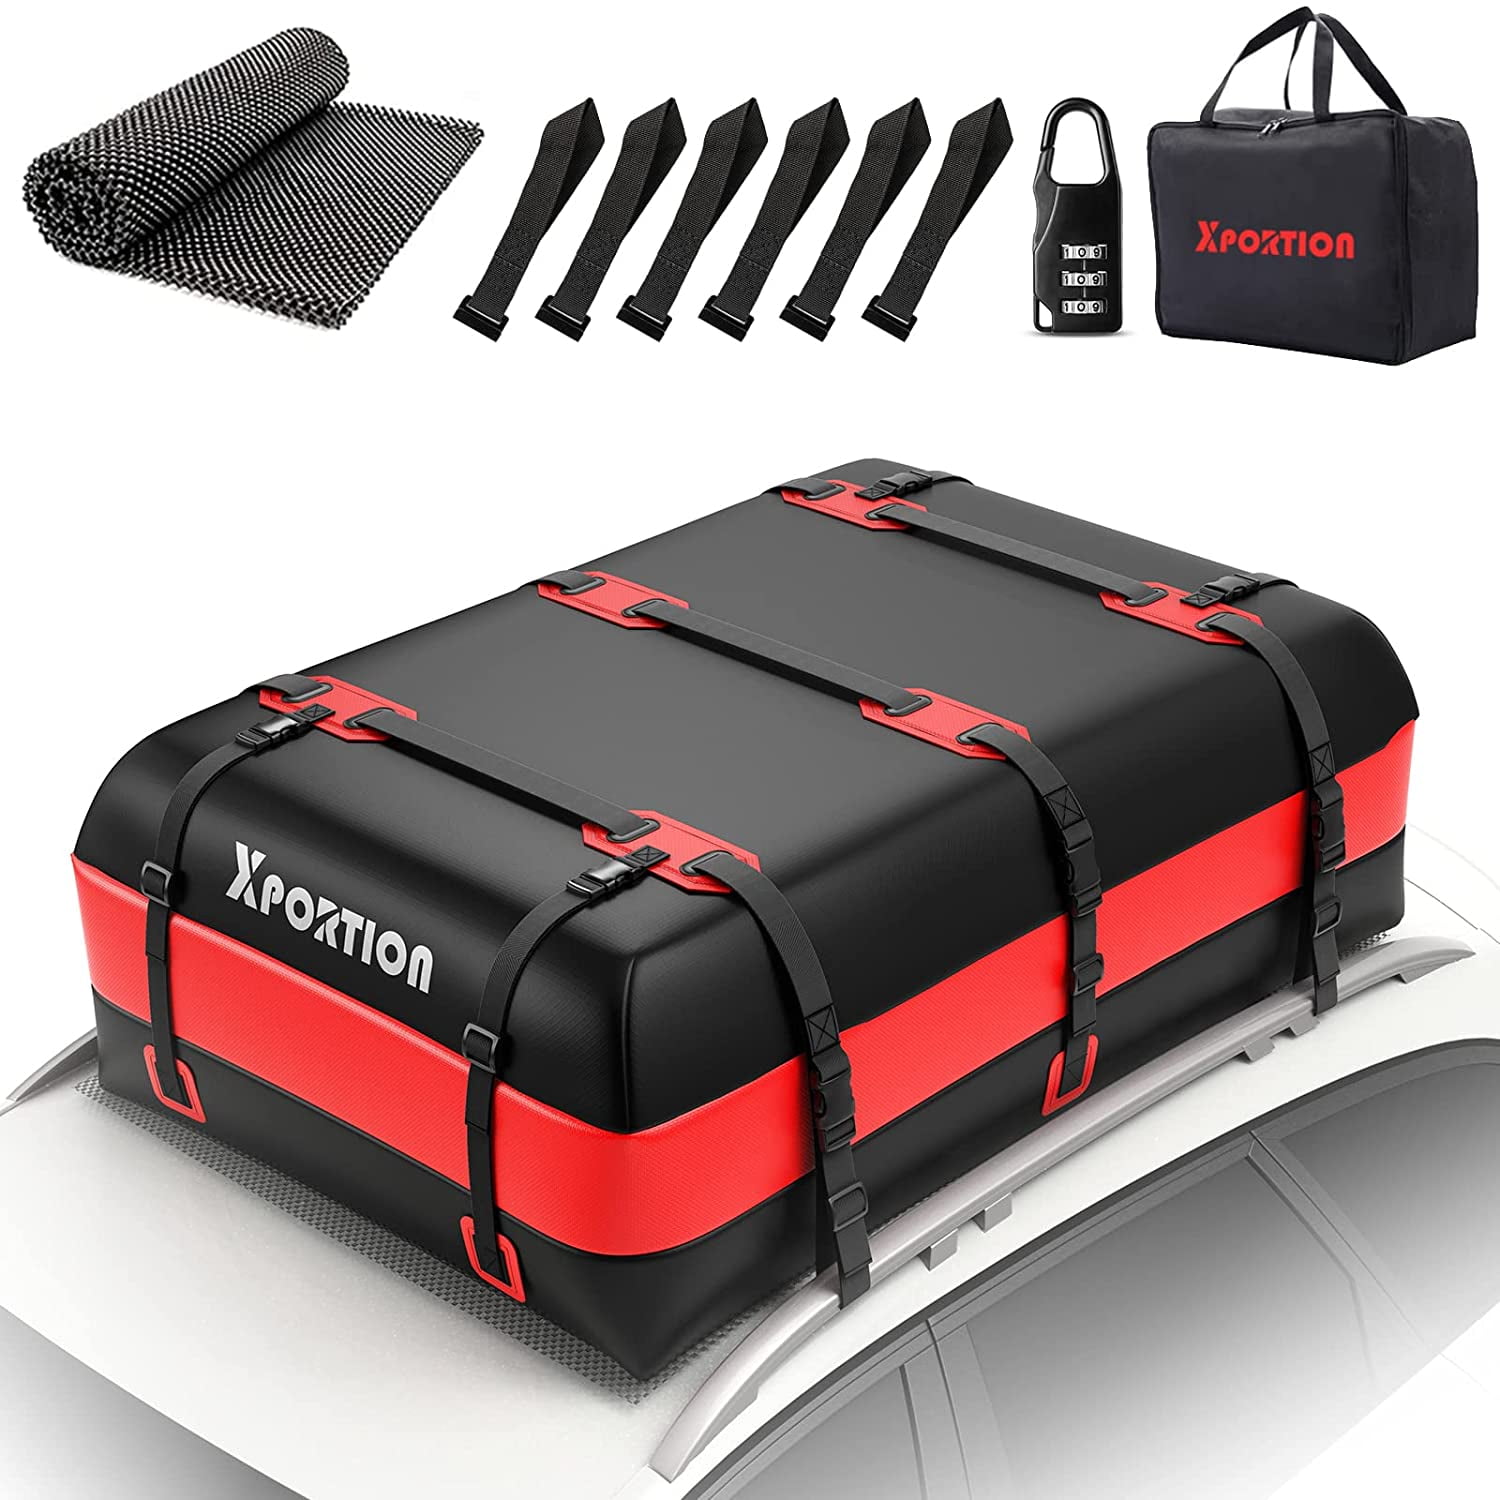 XPORTION Rooftop Cargo Carrier,20 Cubic Feet Car Roof Bag，Waterproof Rooftop Cargo Carrier Bag for All Cars with/Without Rack，Contains Non-Slip Mats Hoor Hooks Reinforcement Straps 